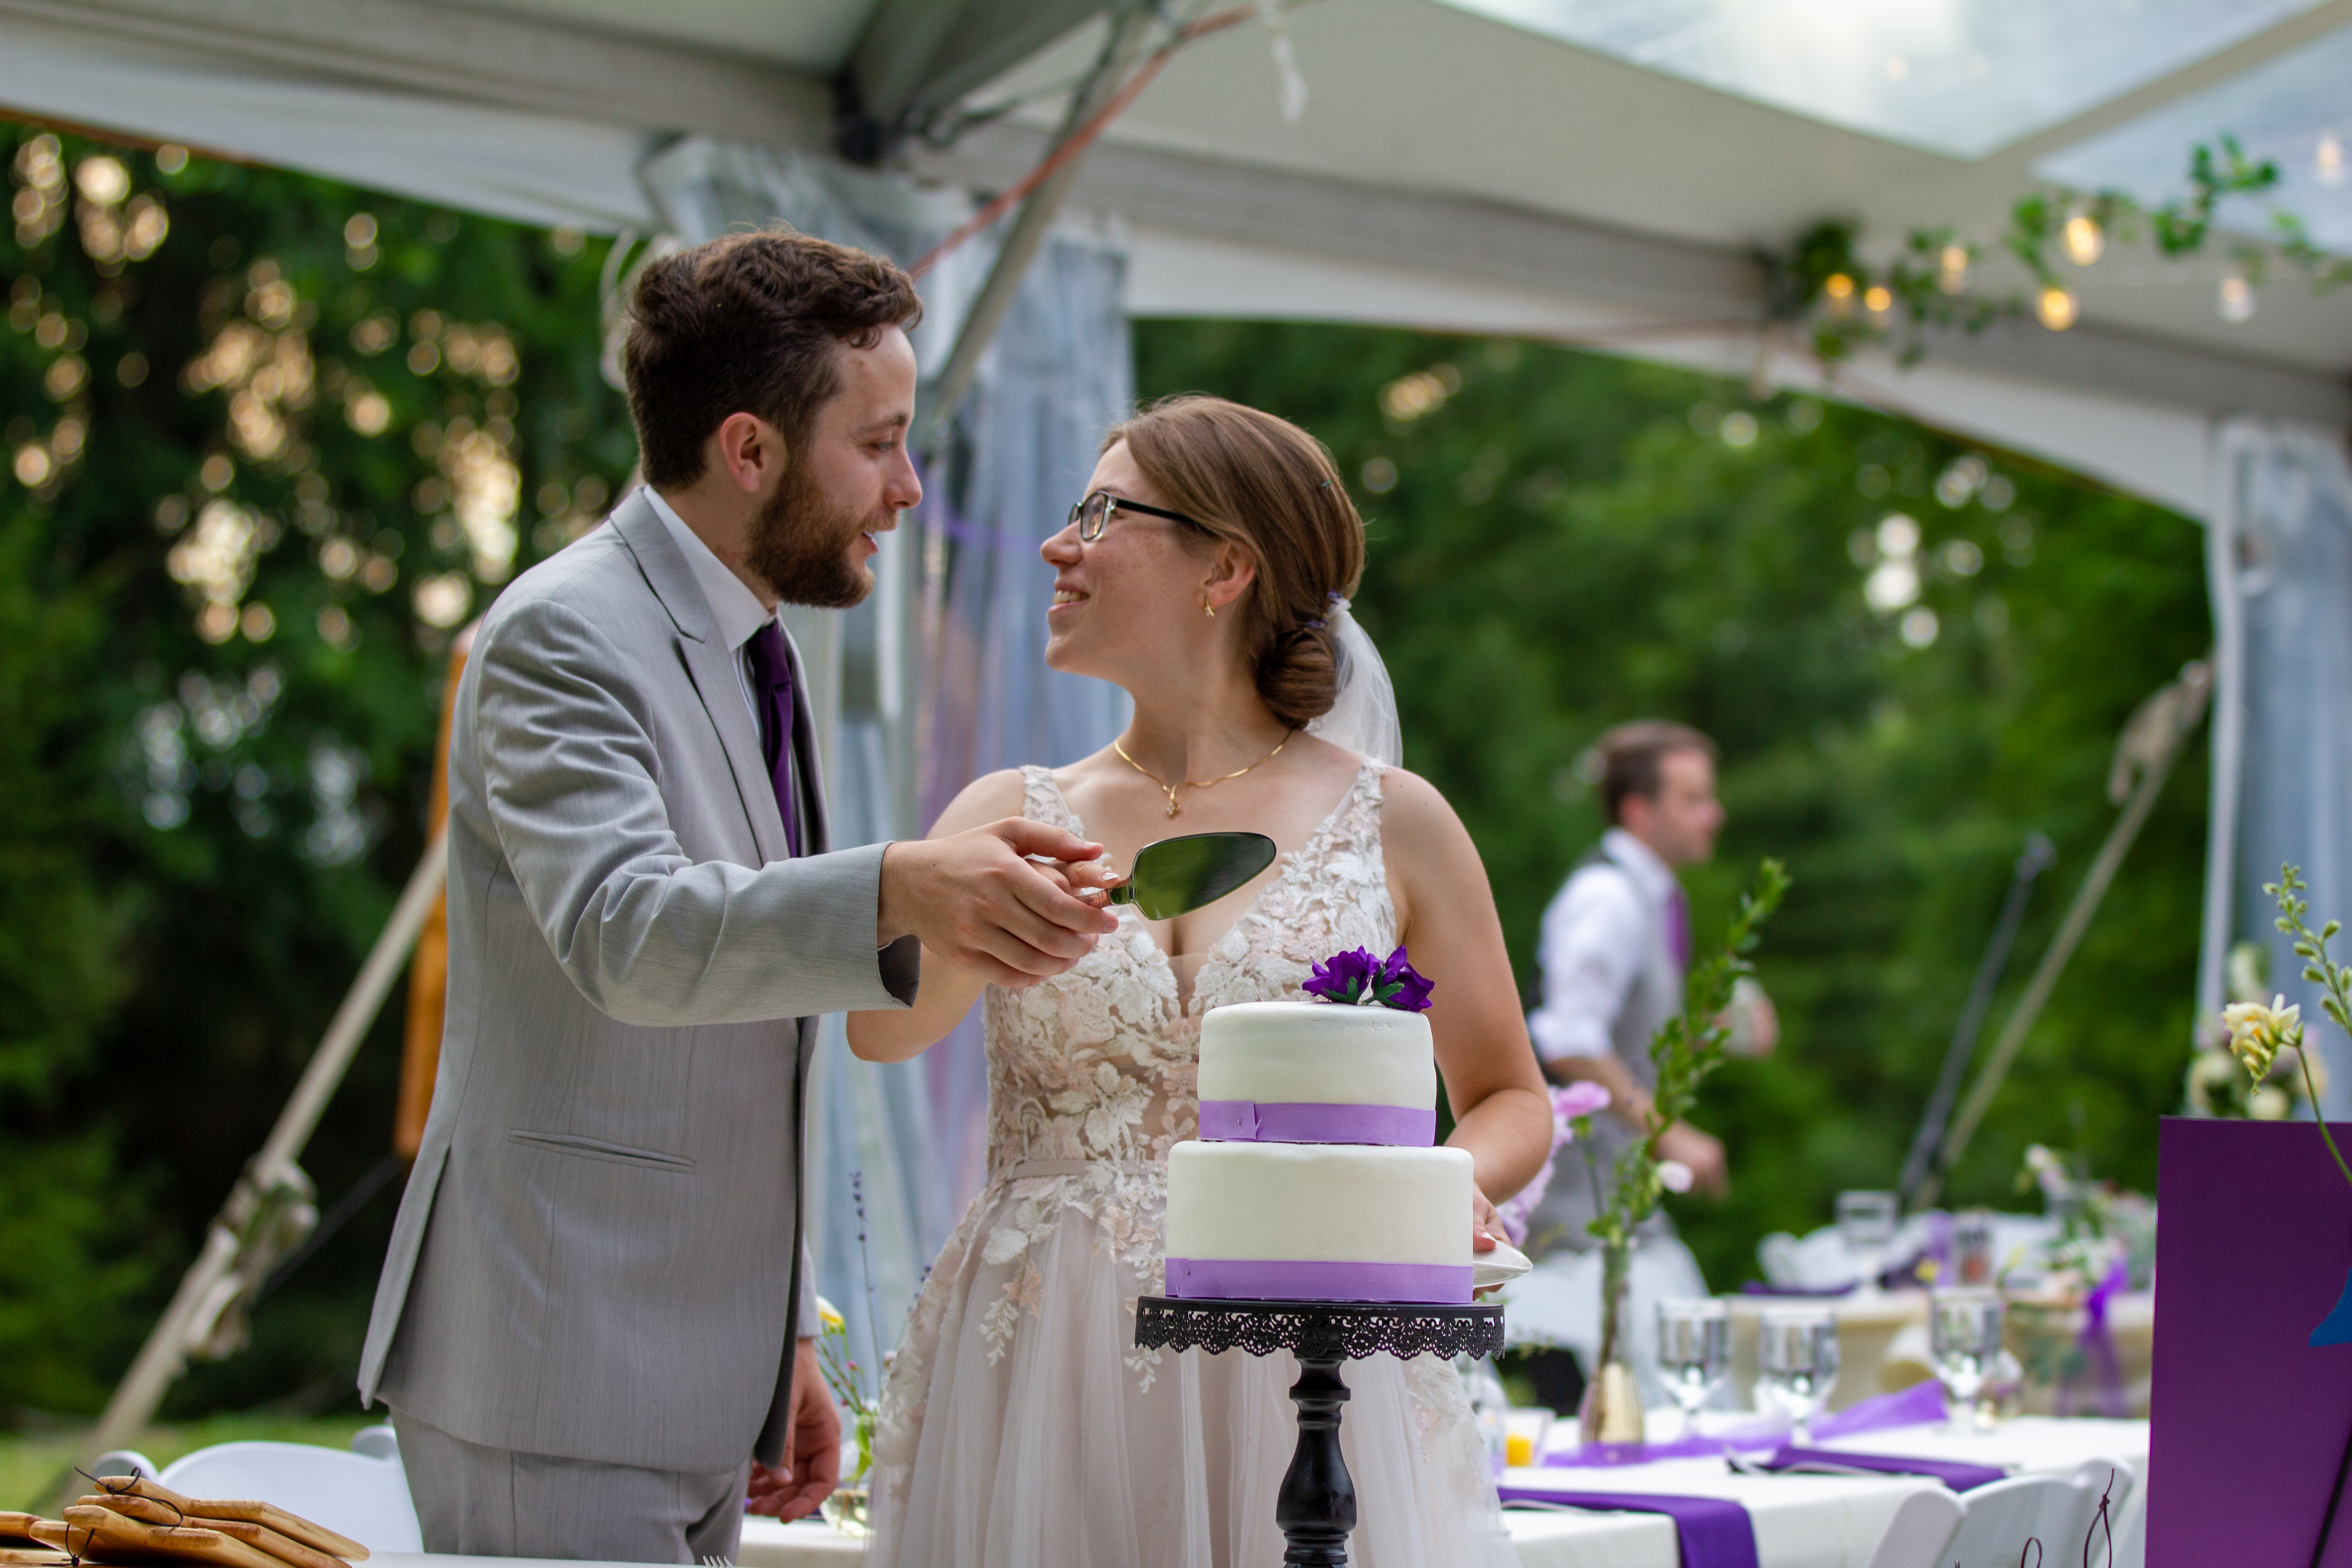 I hold my wife Julia's hand as we prepare to cut the cake for our wedding. She's in a white wedding gown and I'm in a grey suit. The white cake is adorned with purple flowers and ribbons.